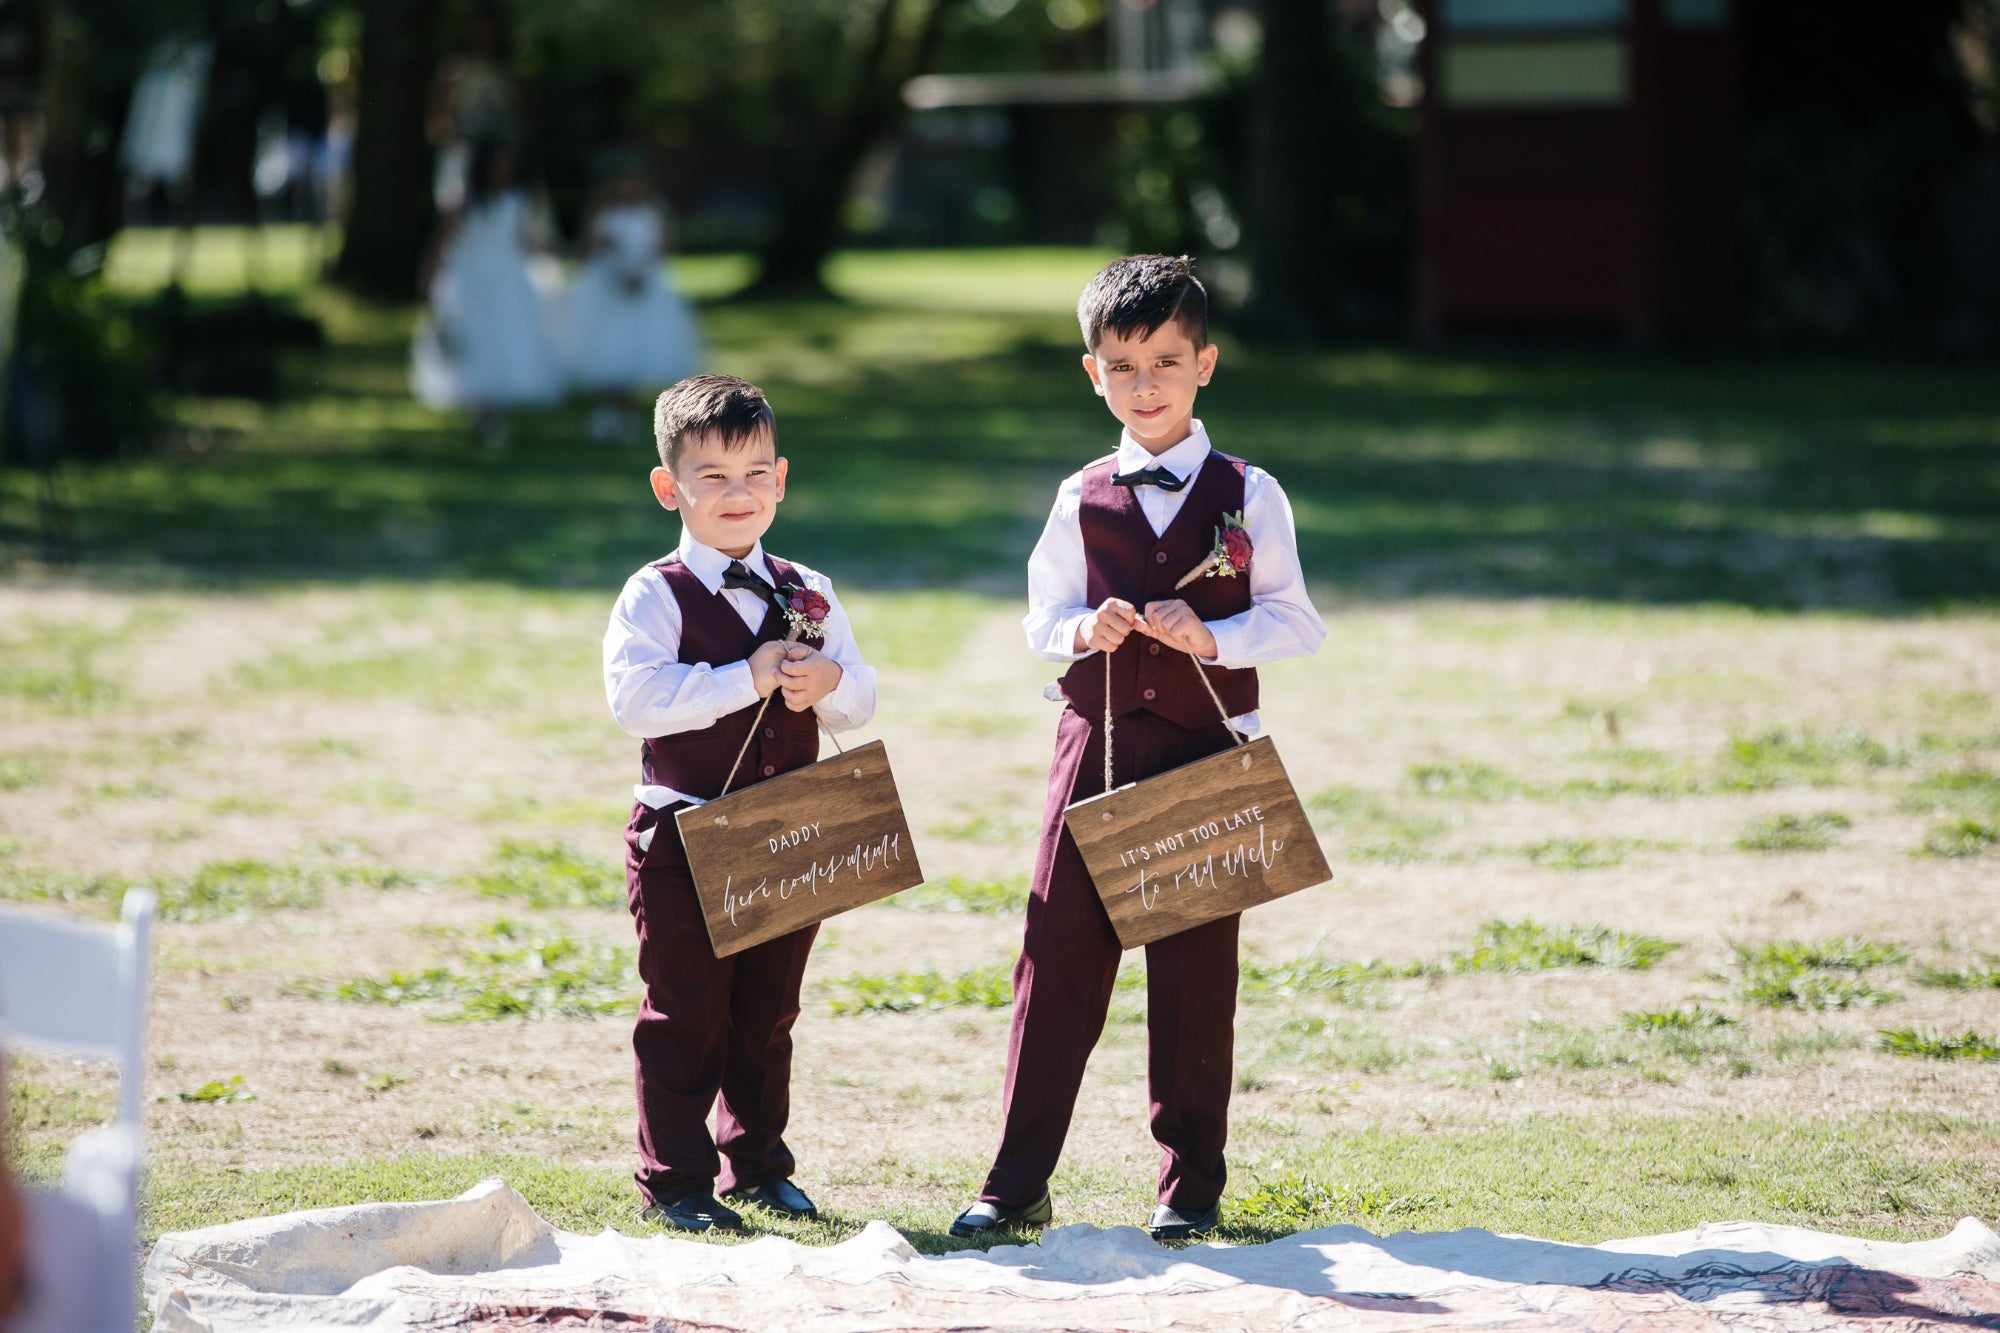 Page Boys with wood signs at Markovina Vineyard Estate | The Paper Gazelle